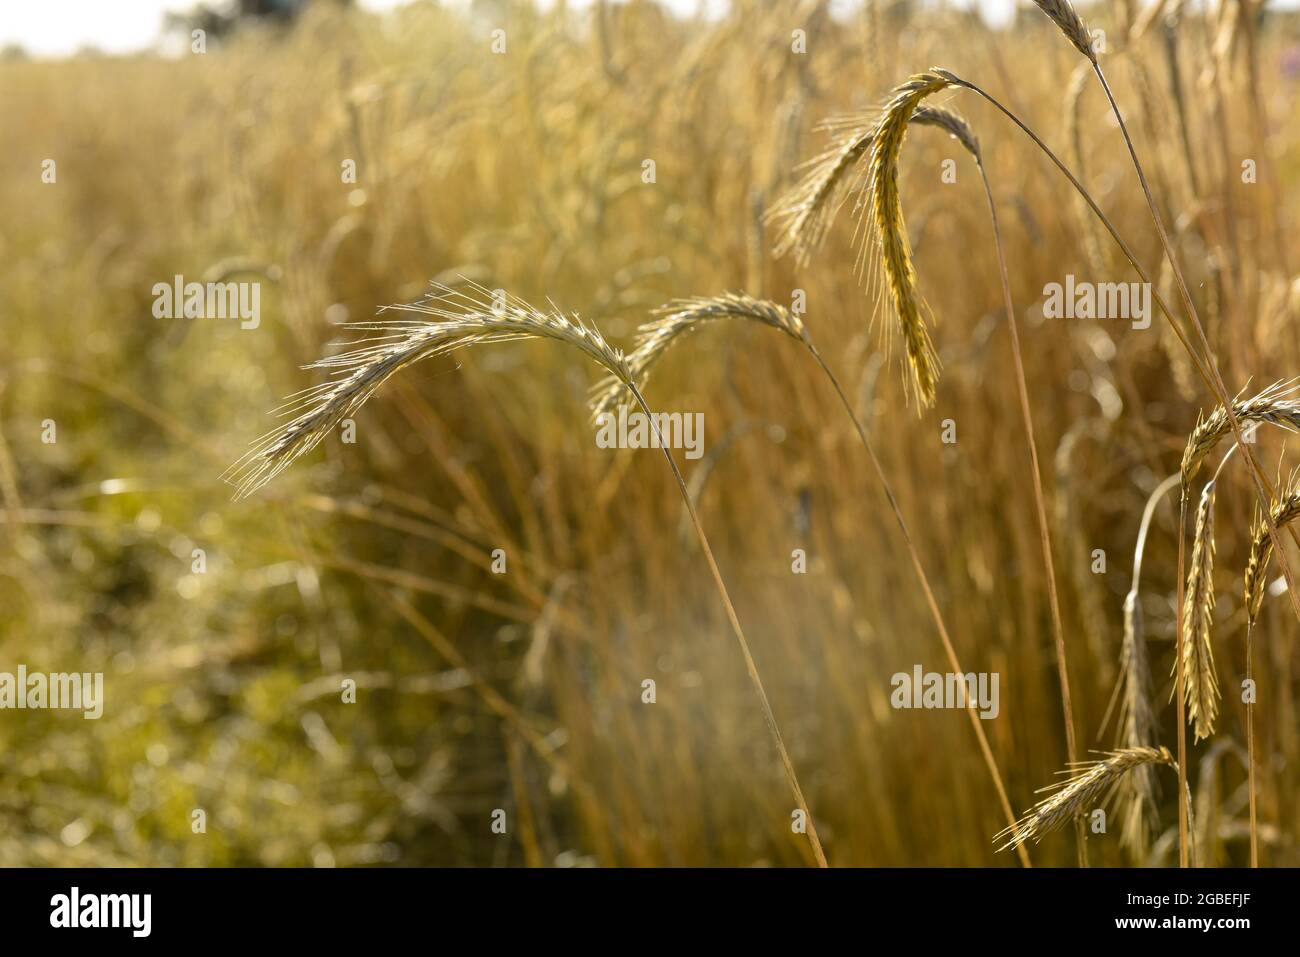 Wheat field in pampas landscape, La Pampa Province, Patagonia, Argentina. Stock Photo